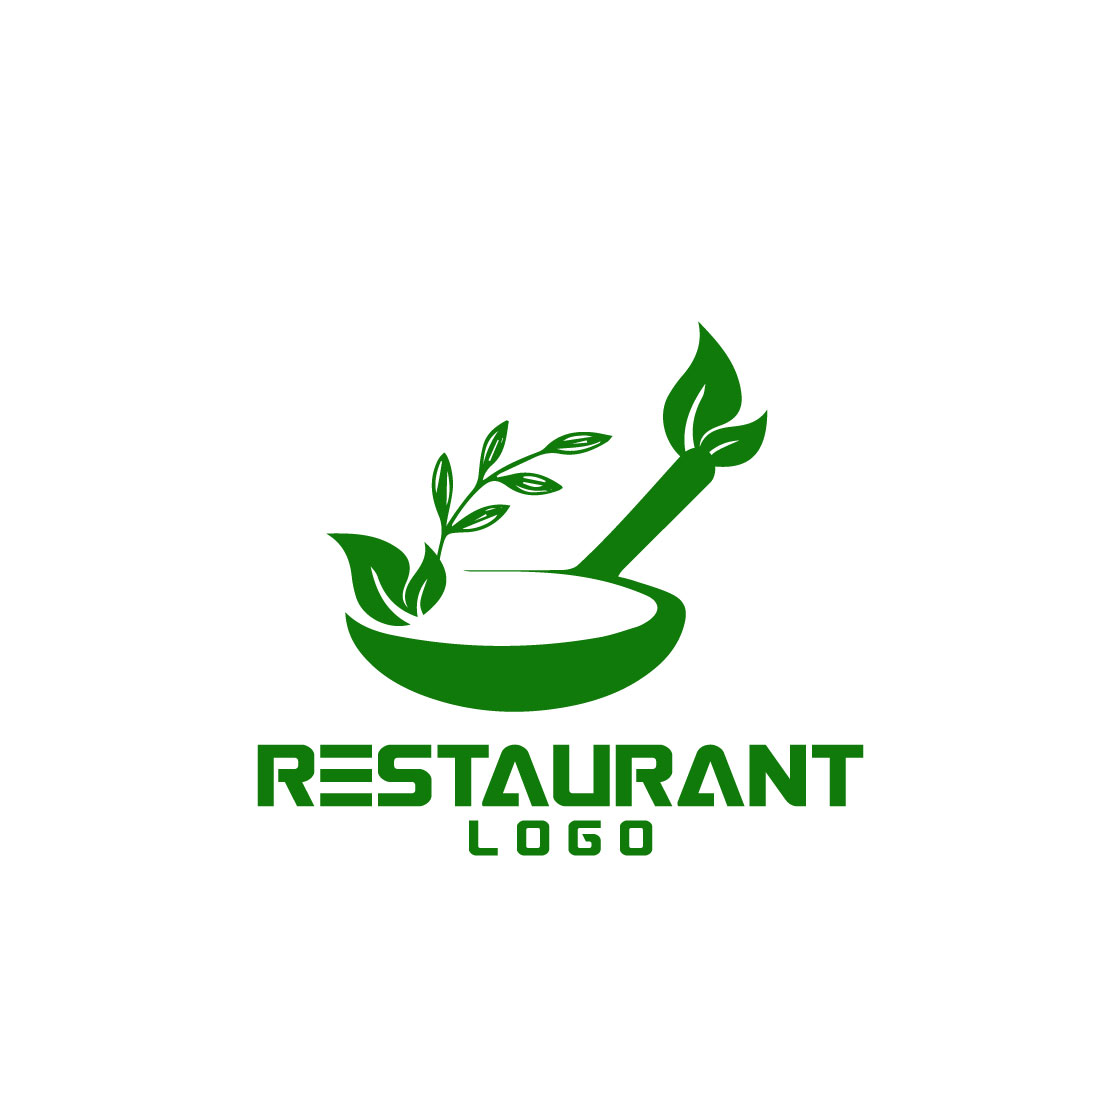 Free Culinary Canvas logo preview image.